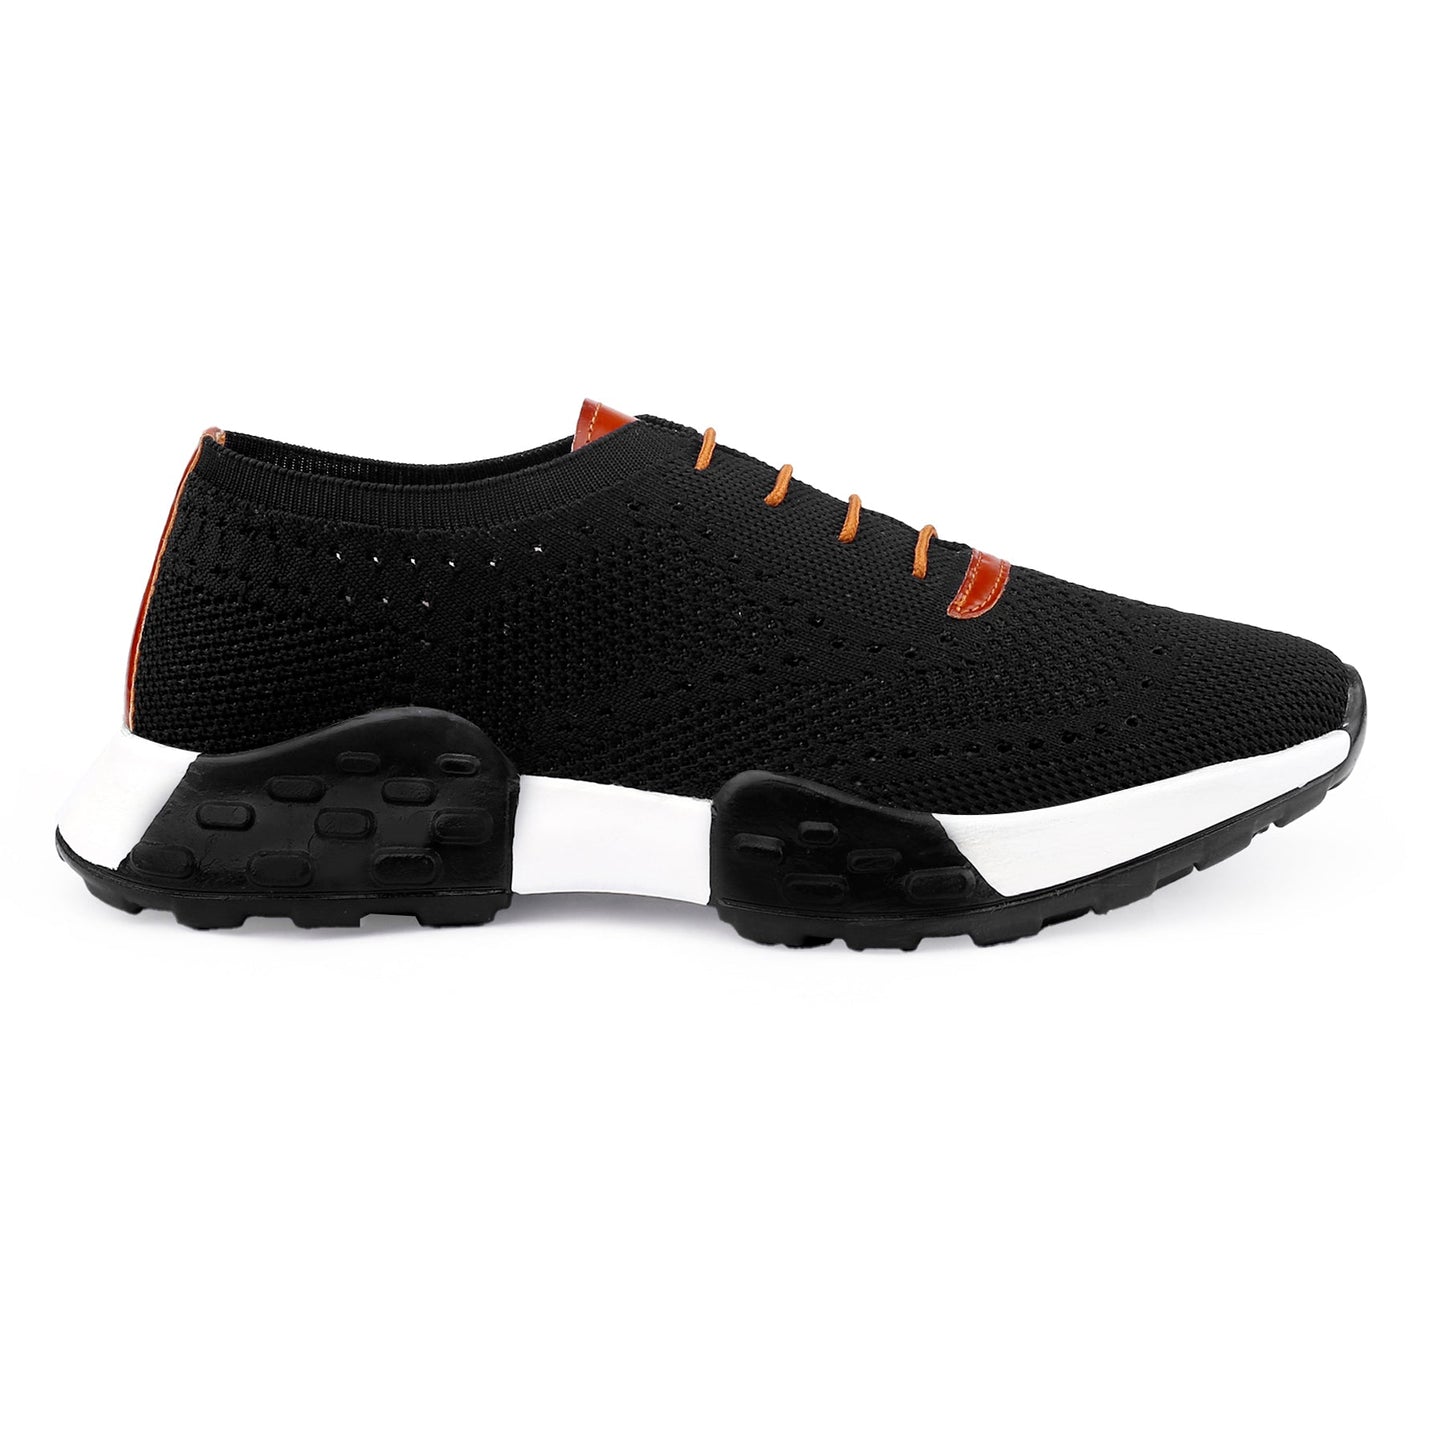 Men's Stylish Casual Lace-Up Sports Running Shoes